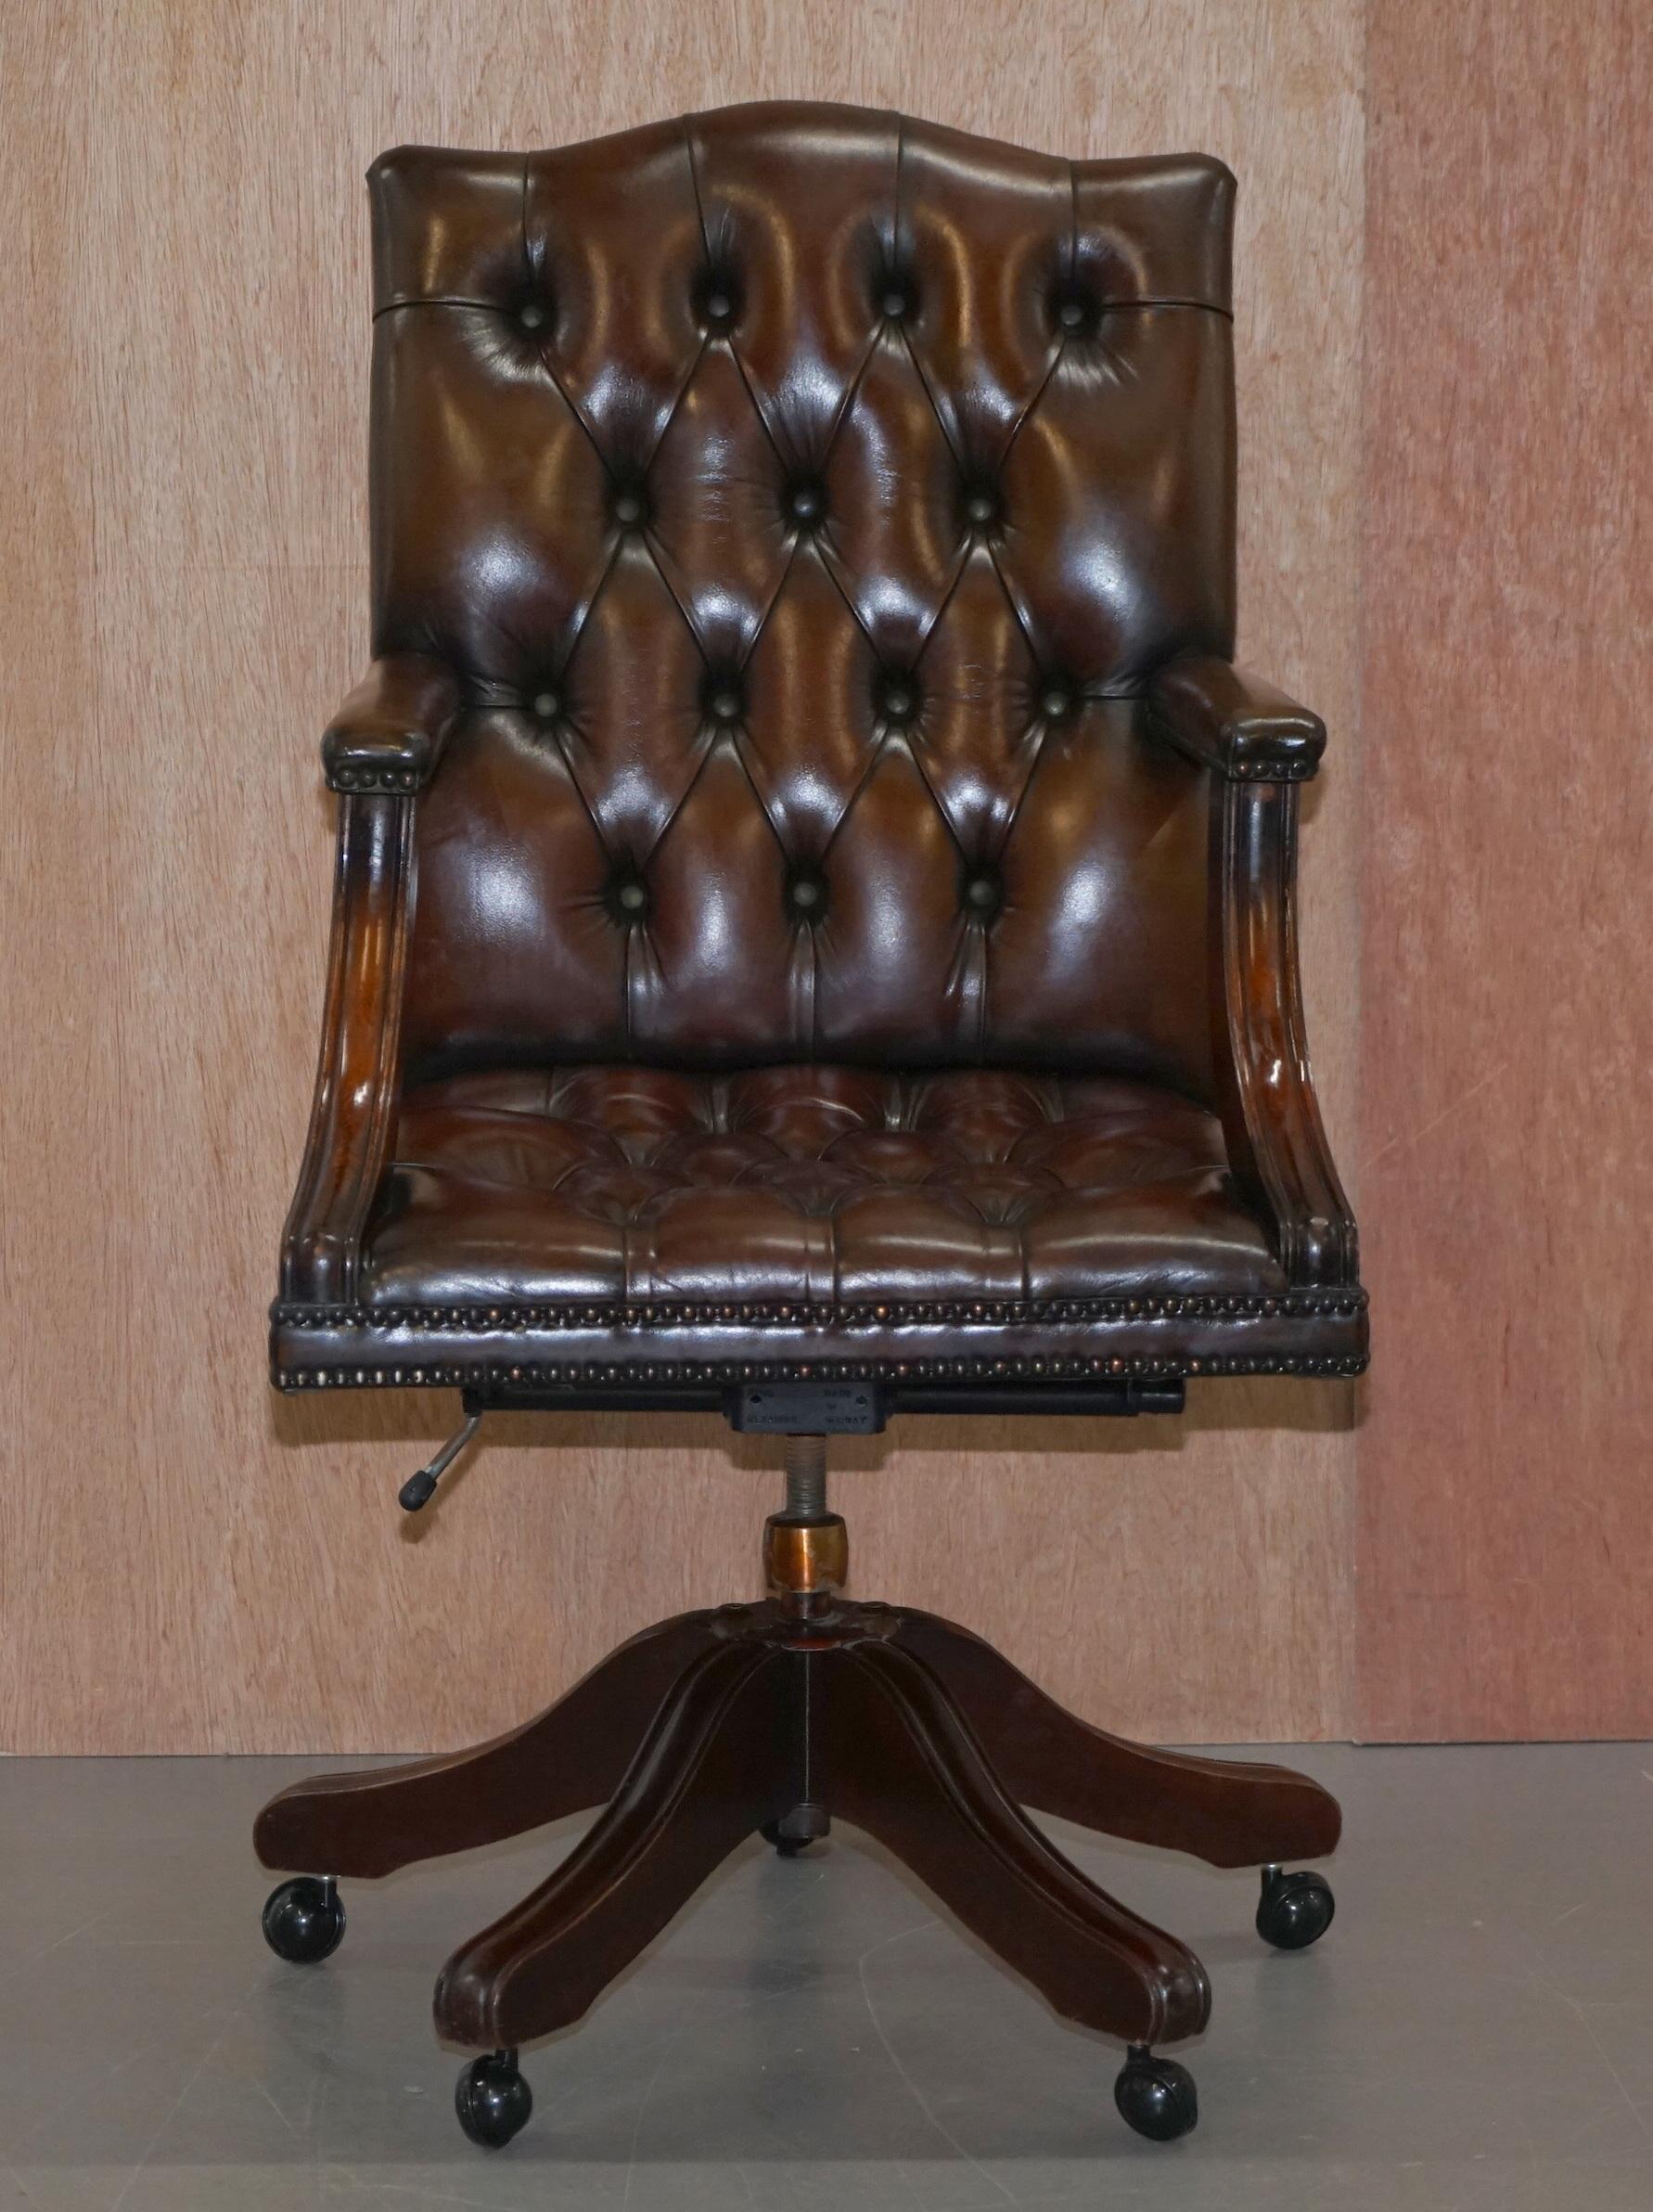 We are delighted to offer for sale this stunning original handmade in England fully restored hand dyed deep brown leather captains armchair

A stunning piece, the frame is solid and beautifully crafted mahogany, the leather is English cattle hide